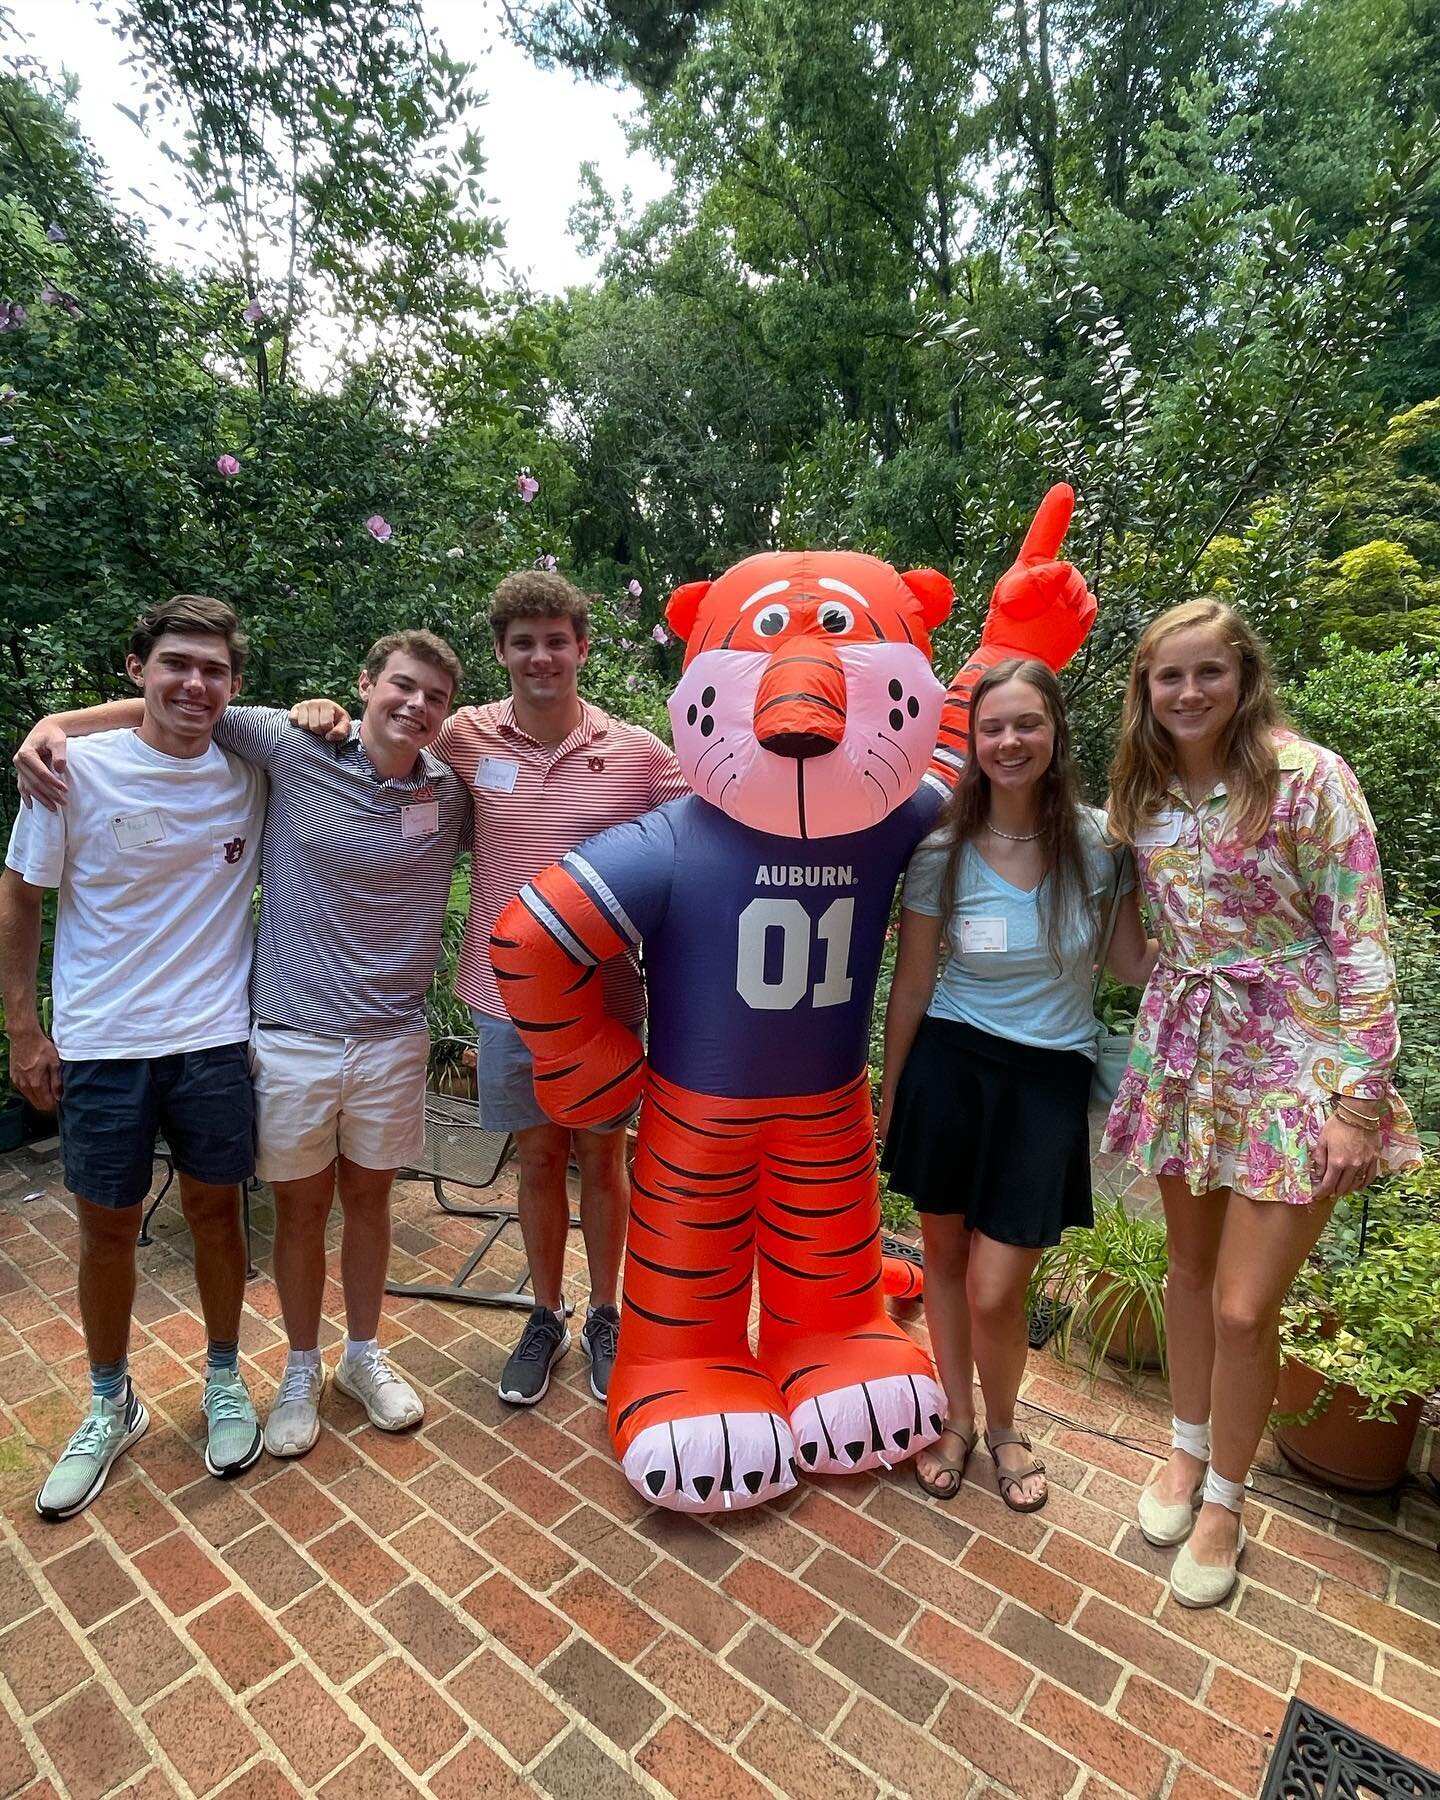 Good luck on the first day of classes to the over 80 Auburn freshmen from the Charlotte Region! We celebrated some of them and their families at our #FreshmenSendOff a few weeks ago! #WarEagle and enjoy your time on The Plains!

#AuburnCharlotte #Aub